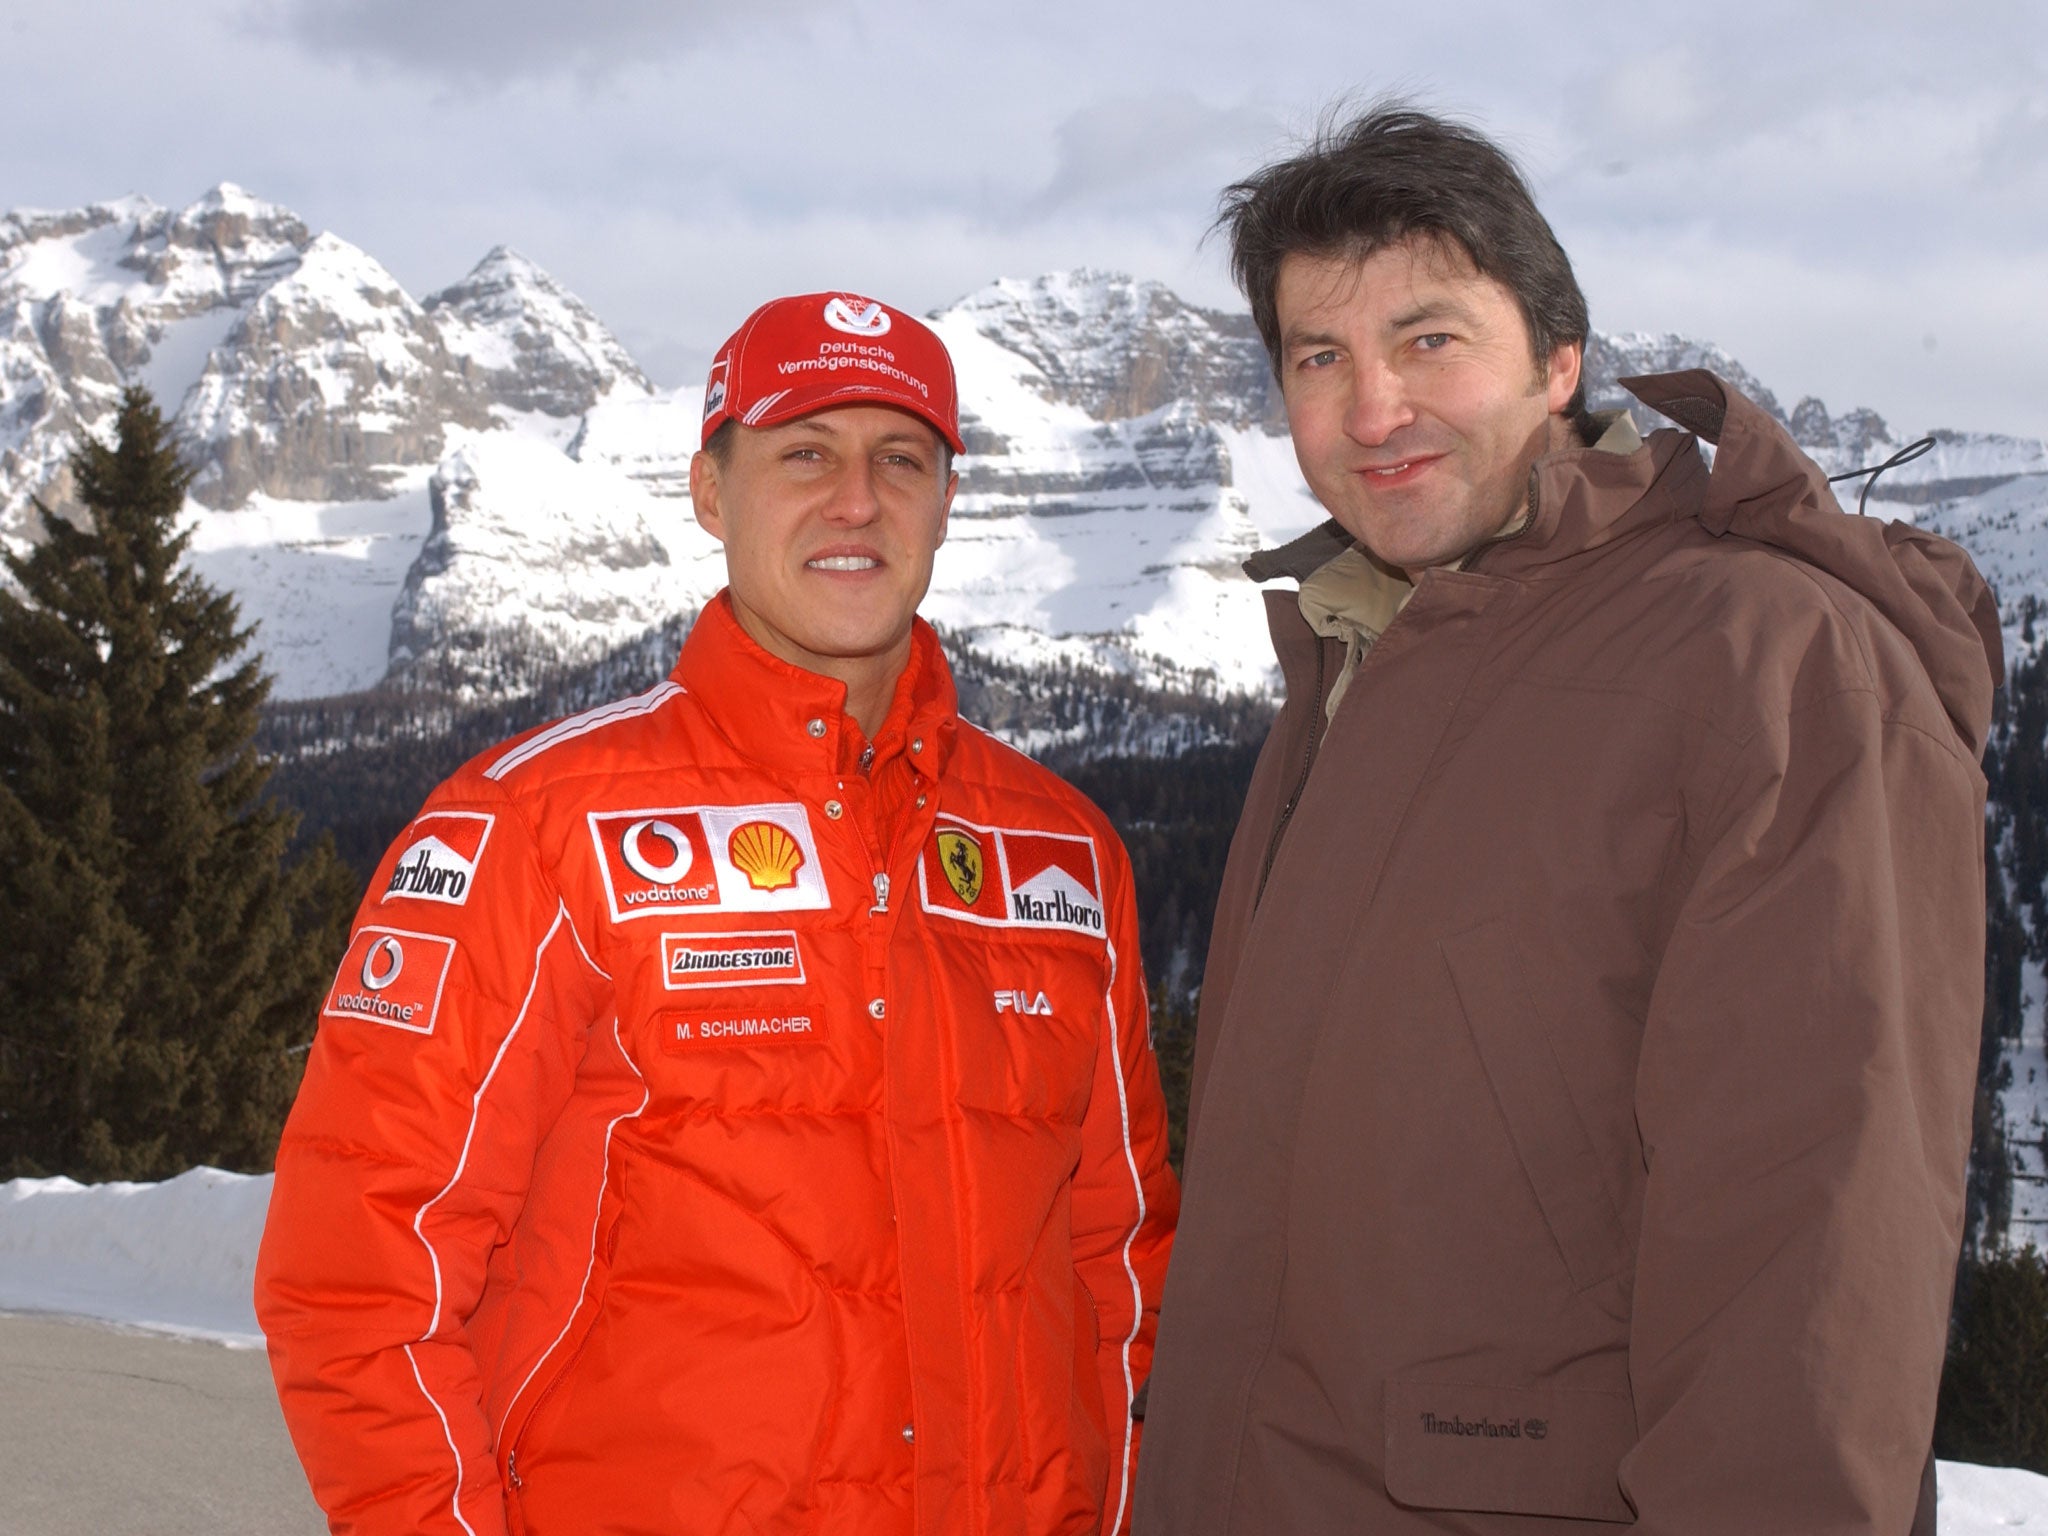 The Independent's Kevin Garside (R) meets seven-time Formula One World Champion Michael Schumacher